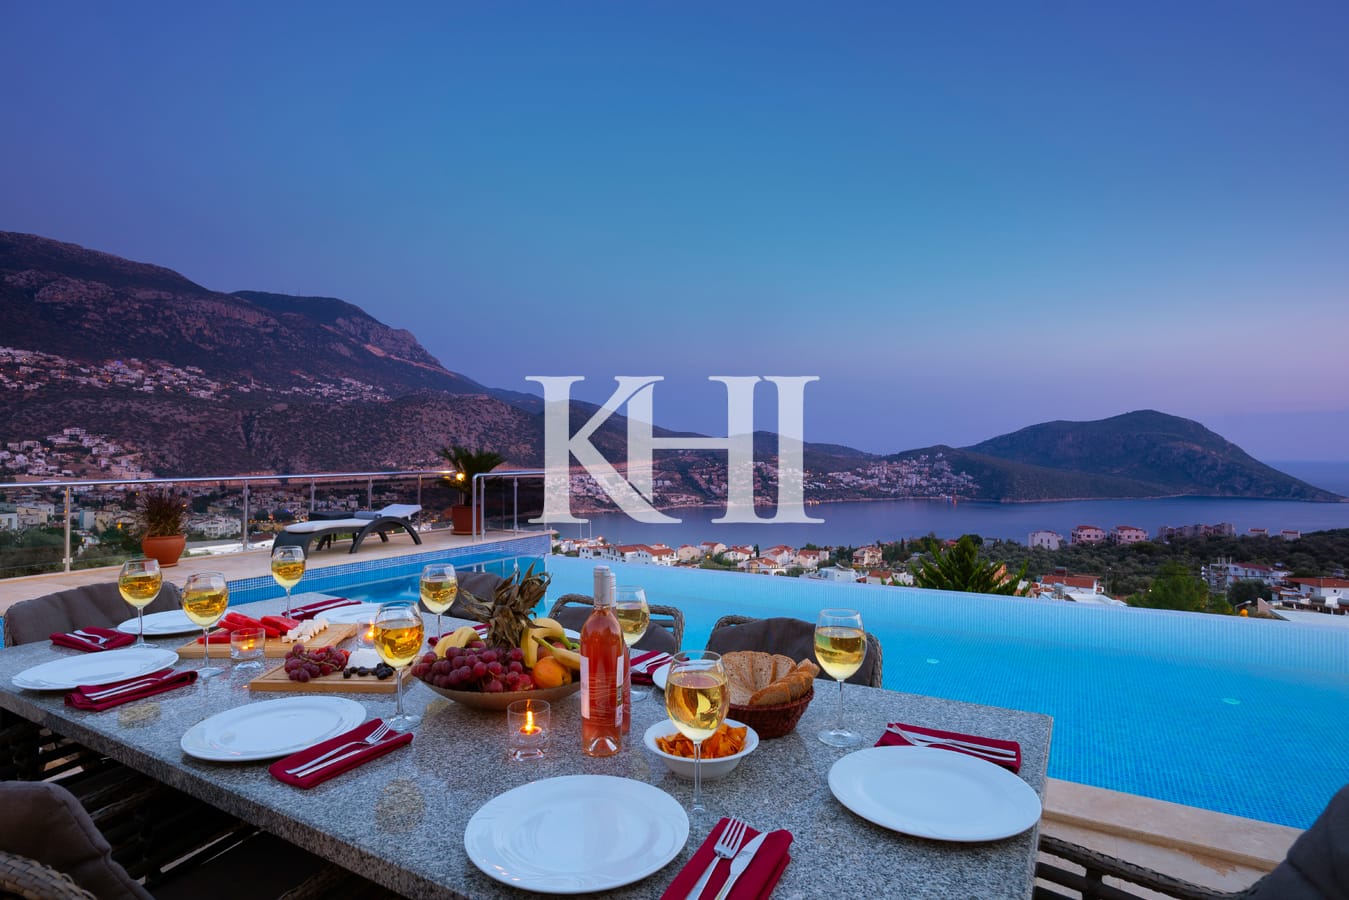 Detached Villa For Sale With Panoramic Kalkan View Slide Image 9